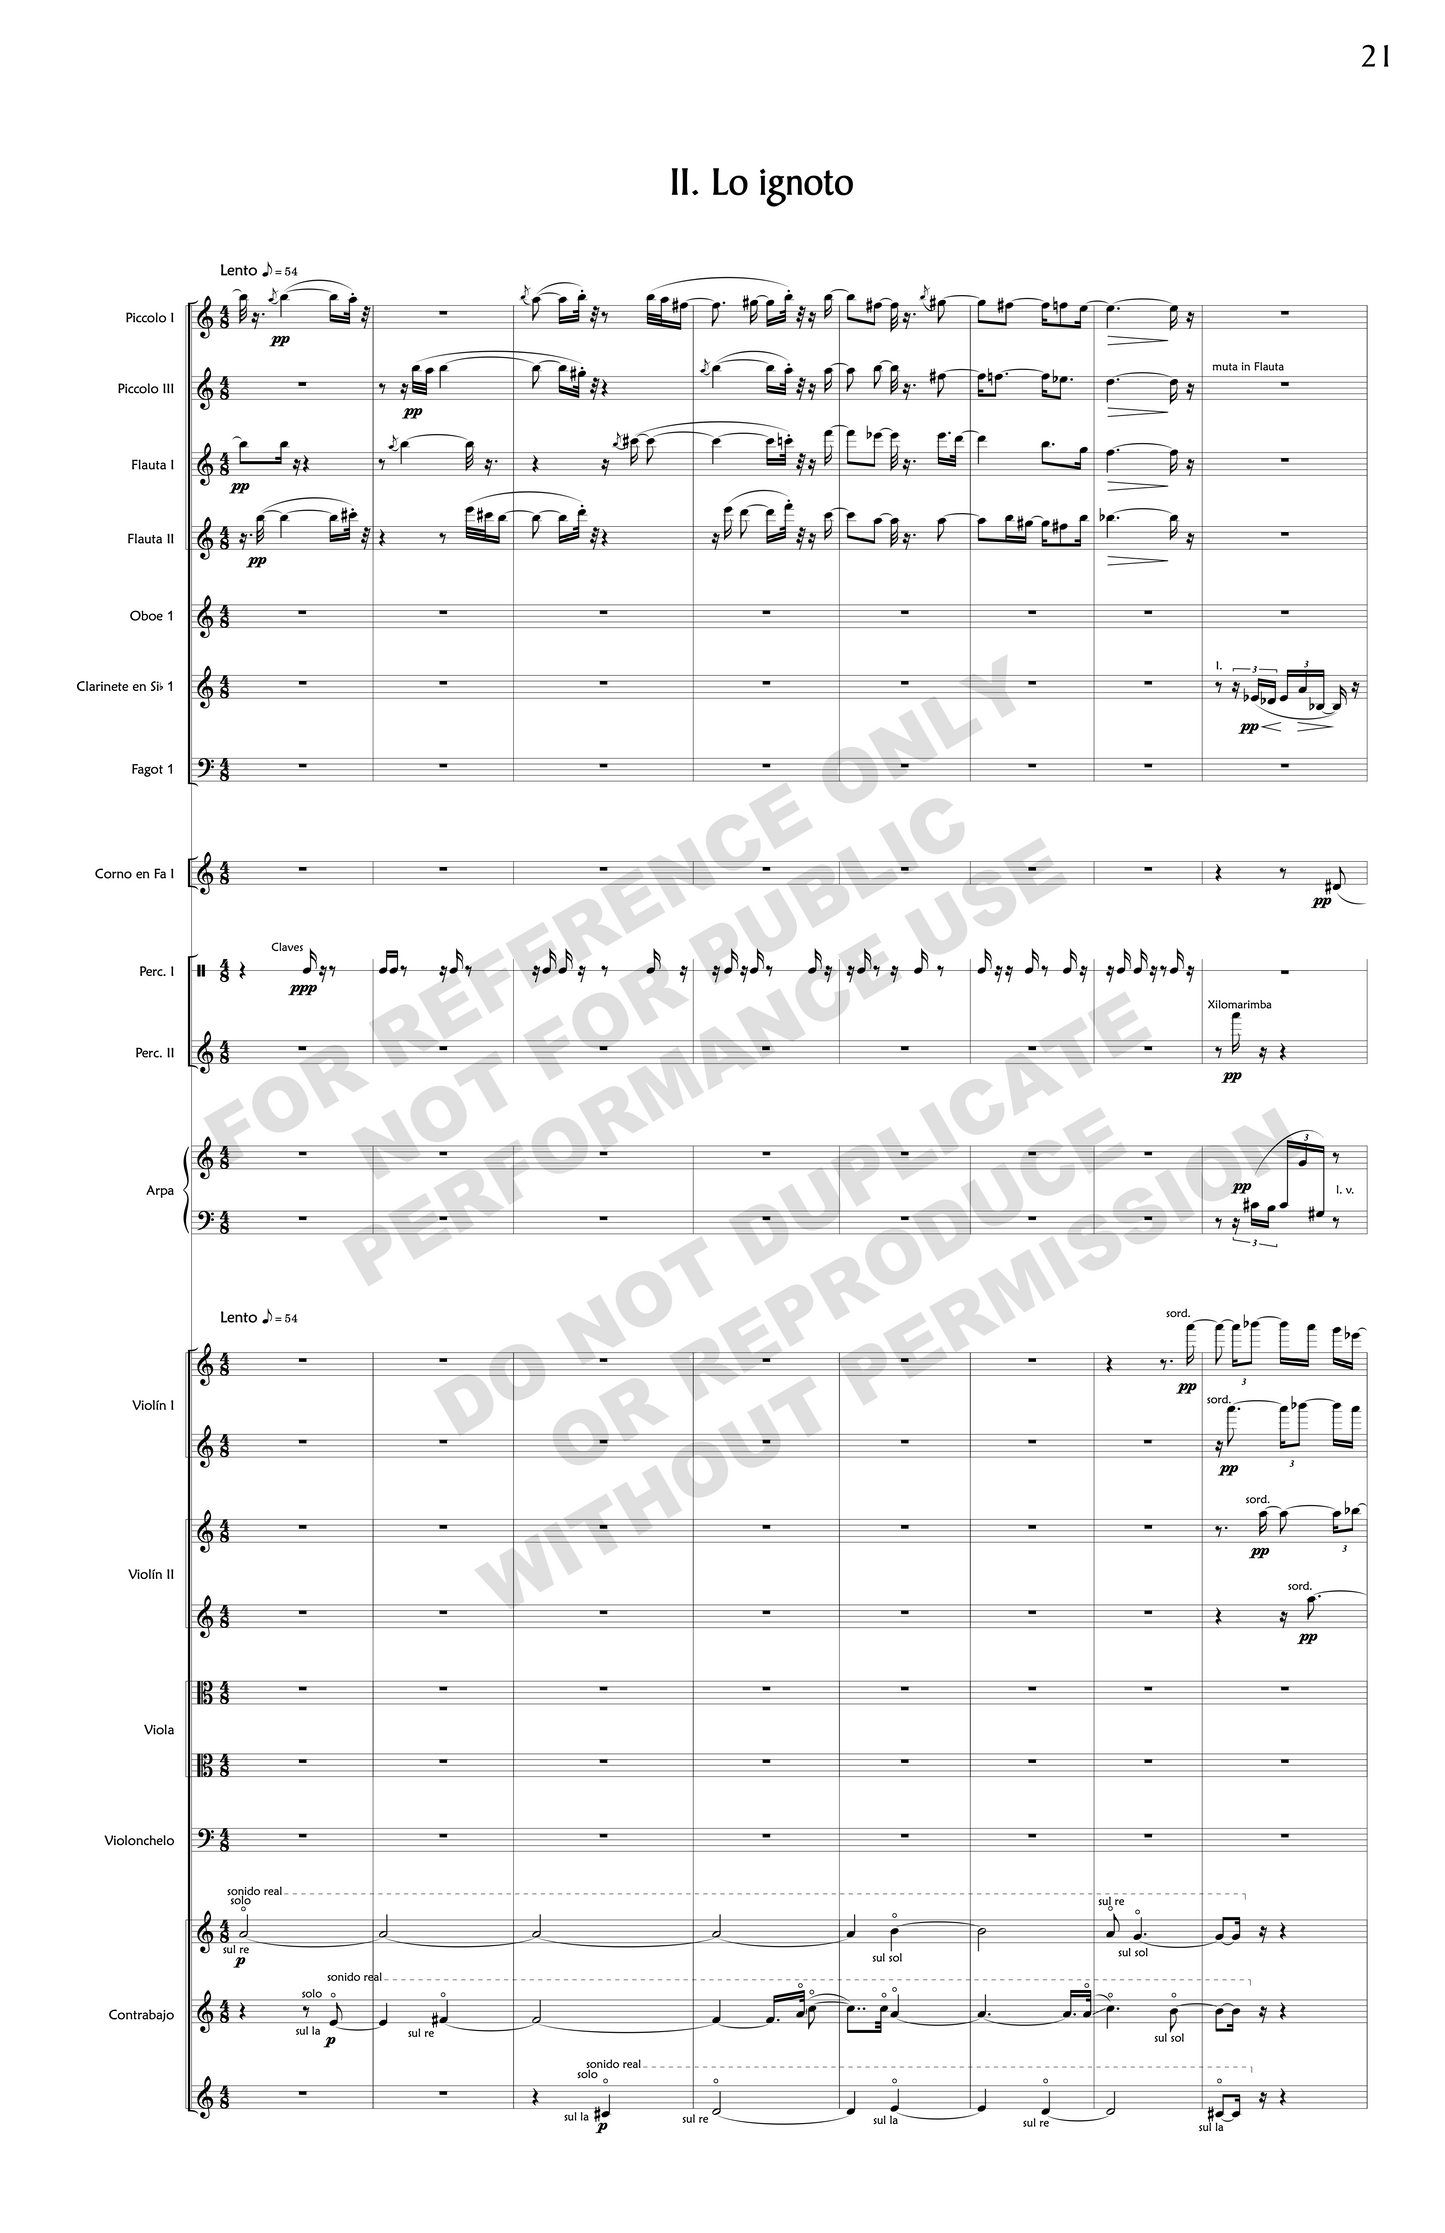 Symphony Nº 2, "Introspections", for mixed chorus and orchestra